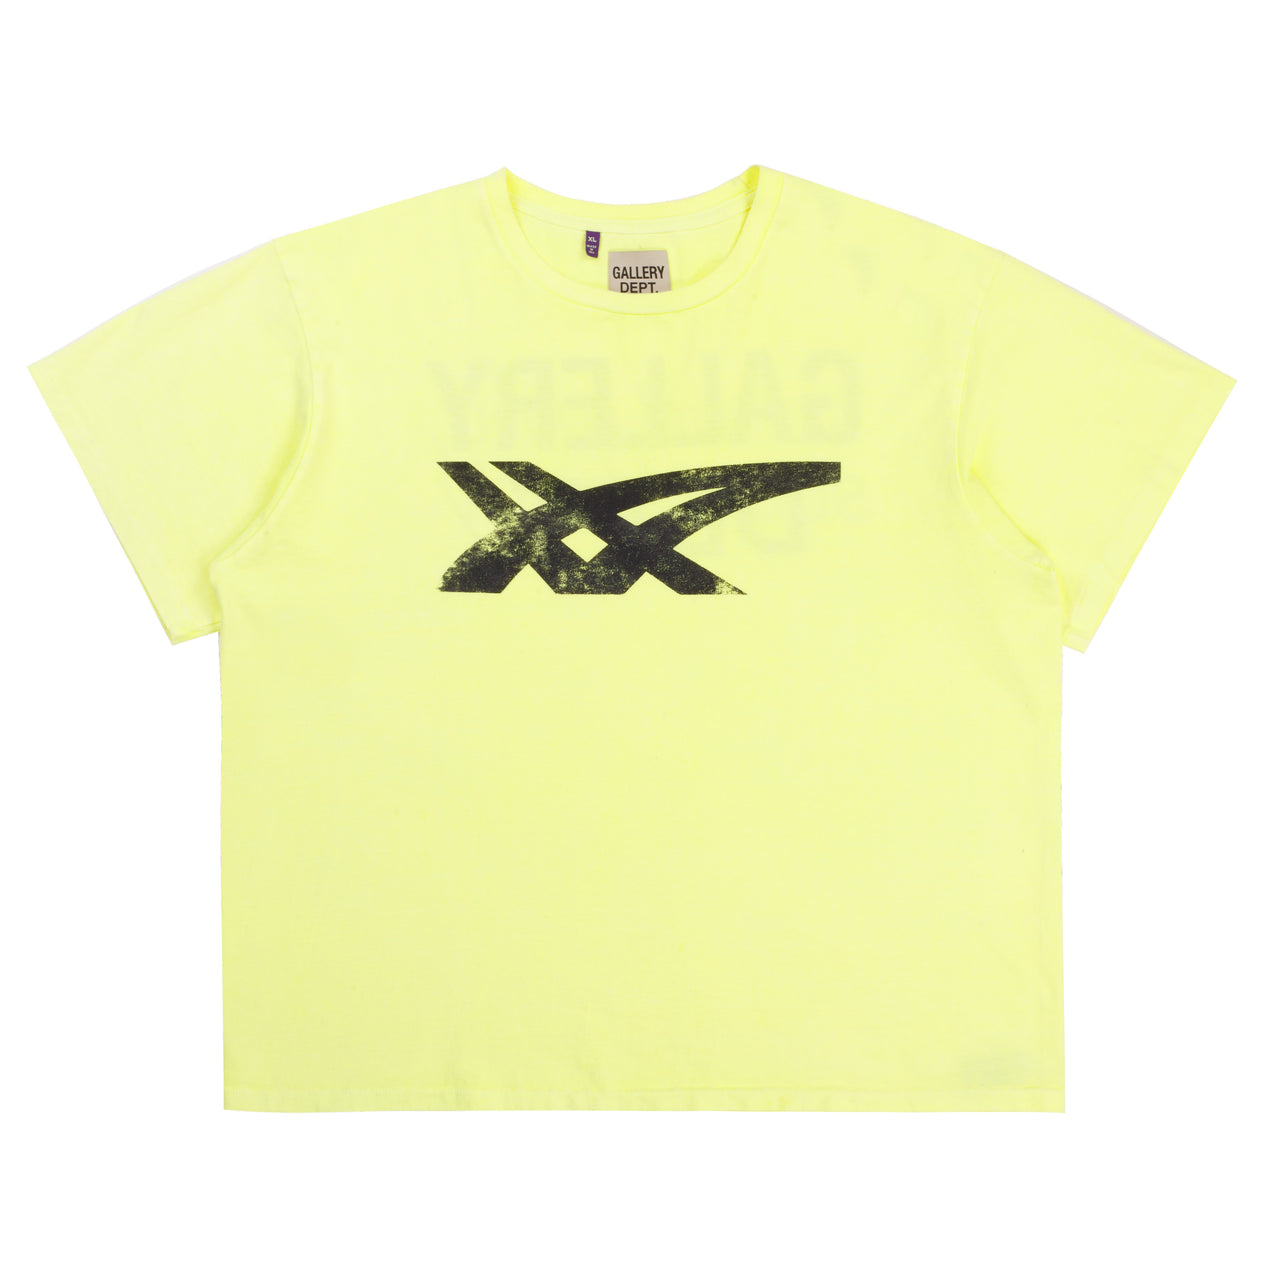 Gallery Dept. x Asics Complexcon Tee Neon (Pre-Owned)